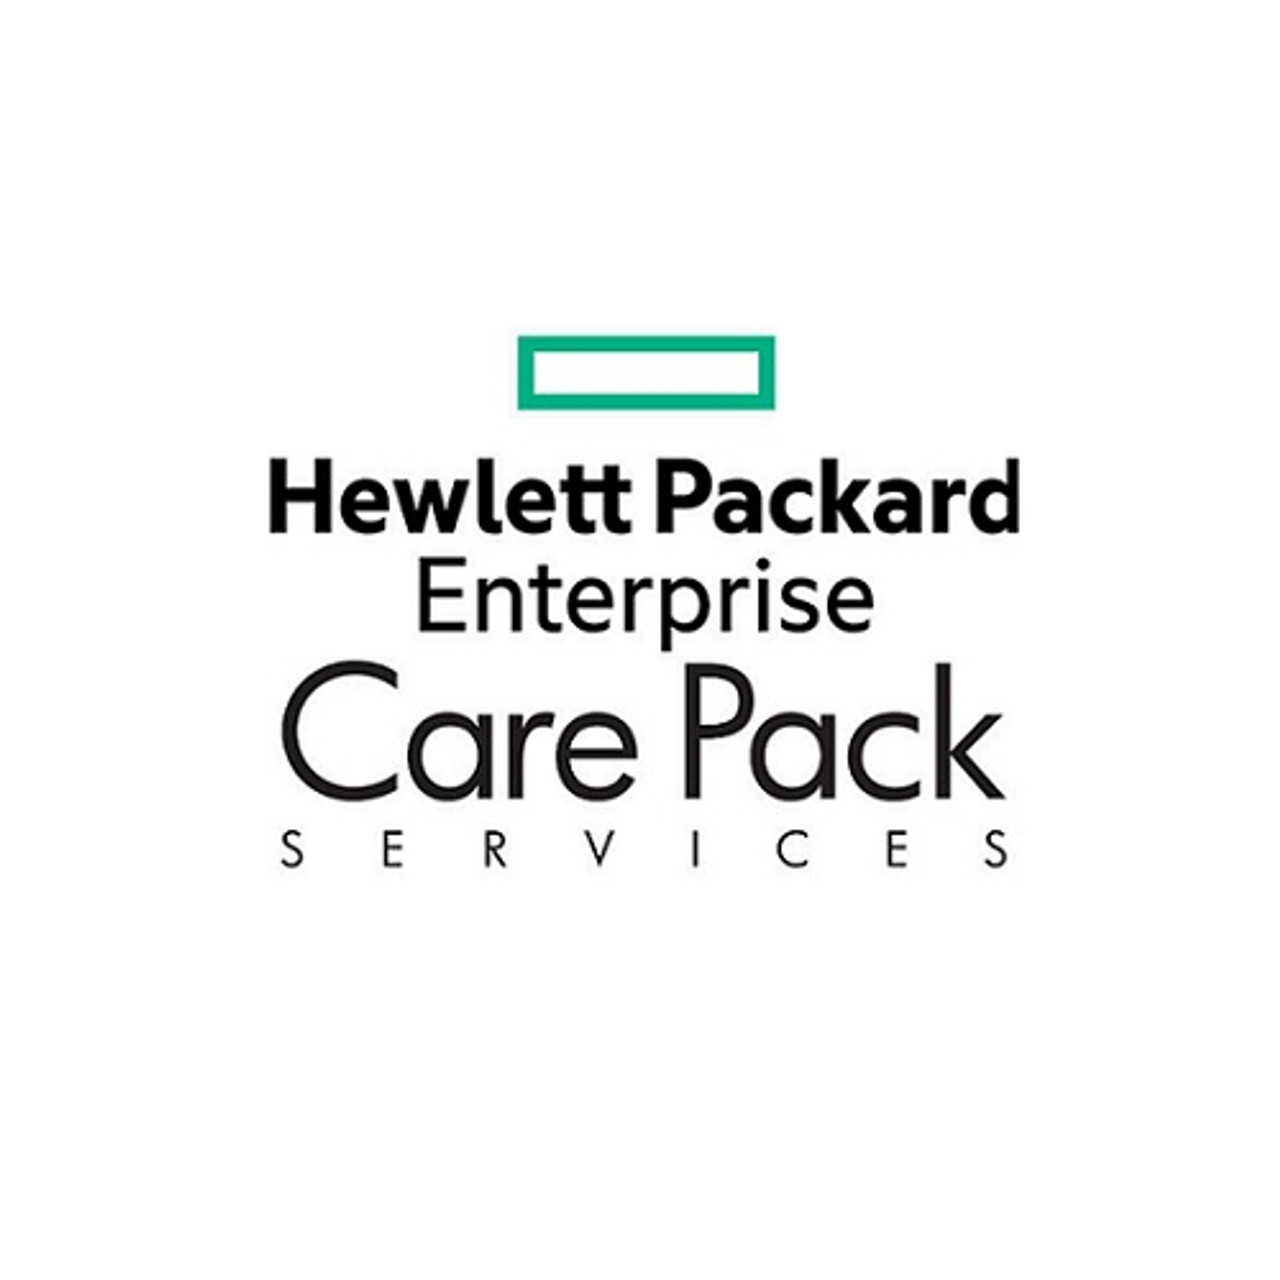 HPE 1 Year Post Warranty Foundation Care 24x7 7503/02 Swt pdt Service